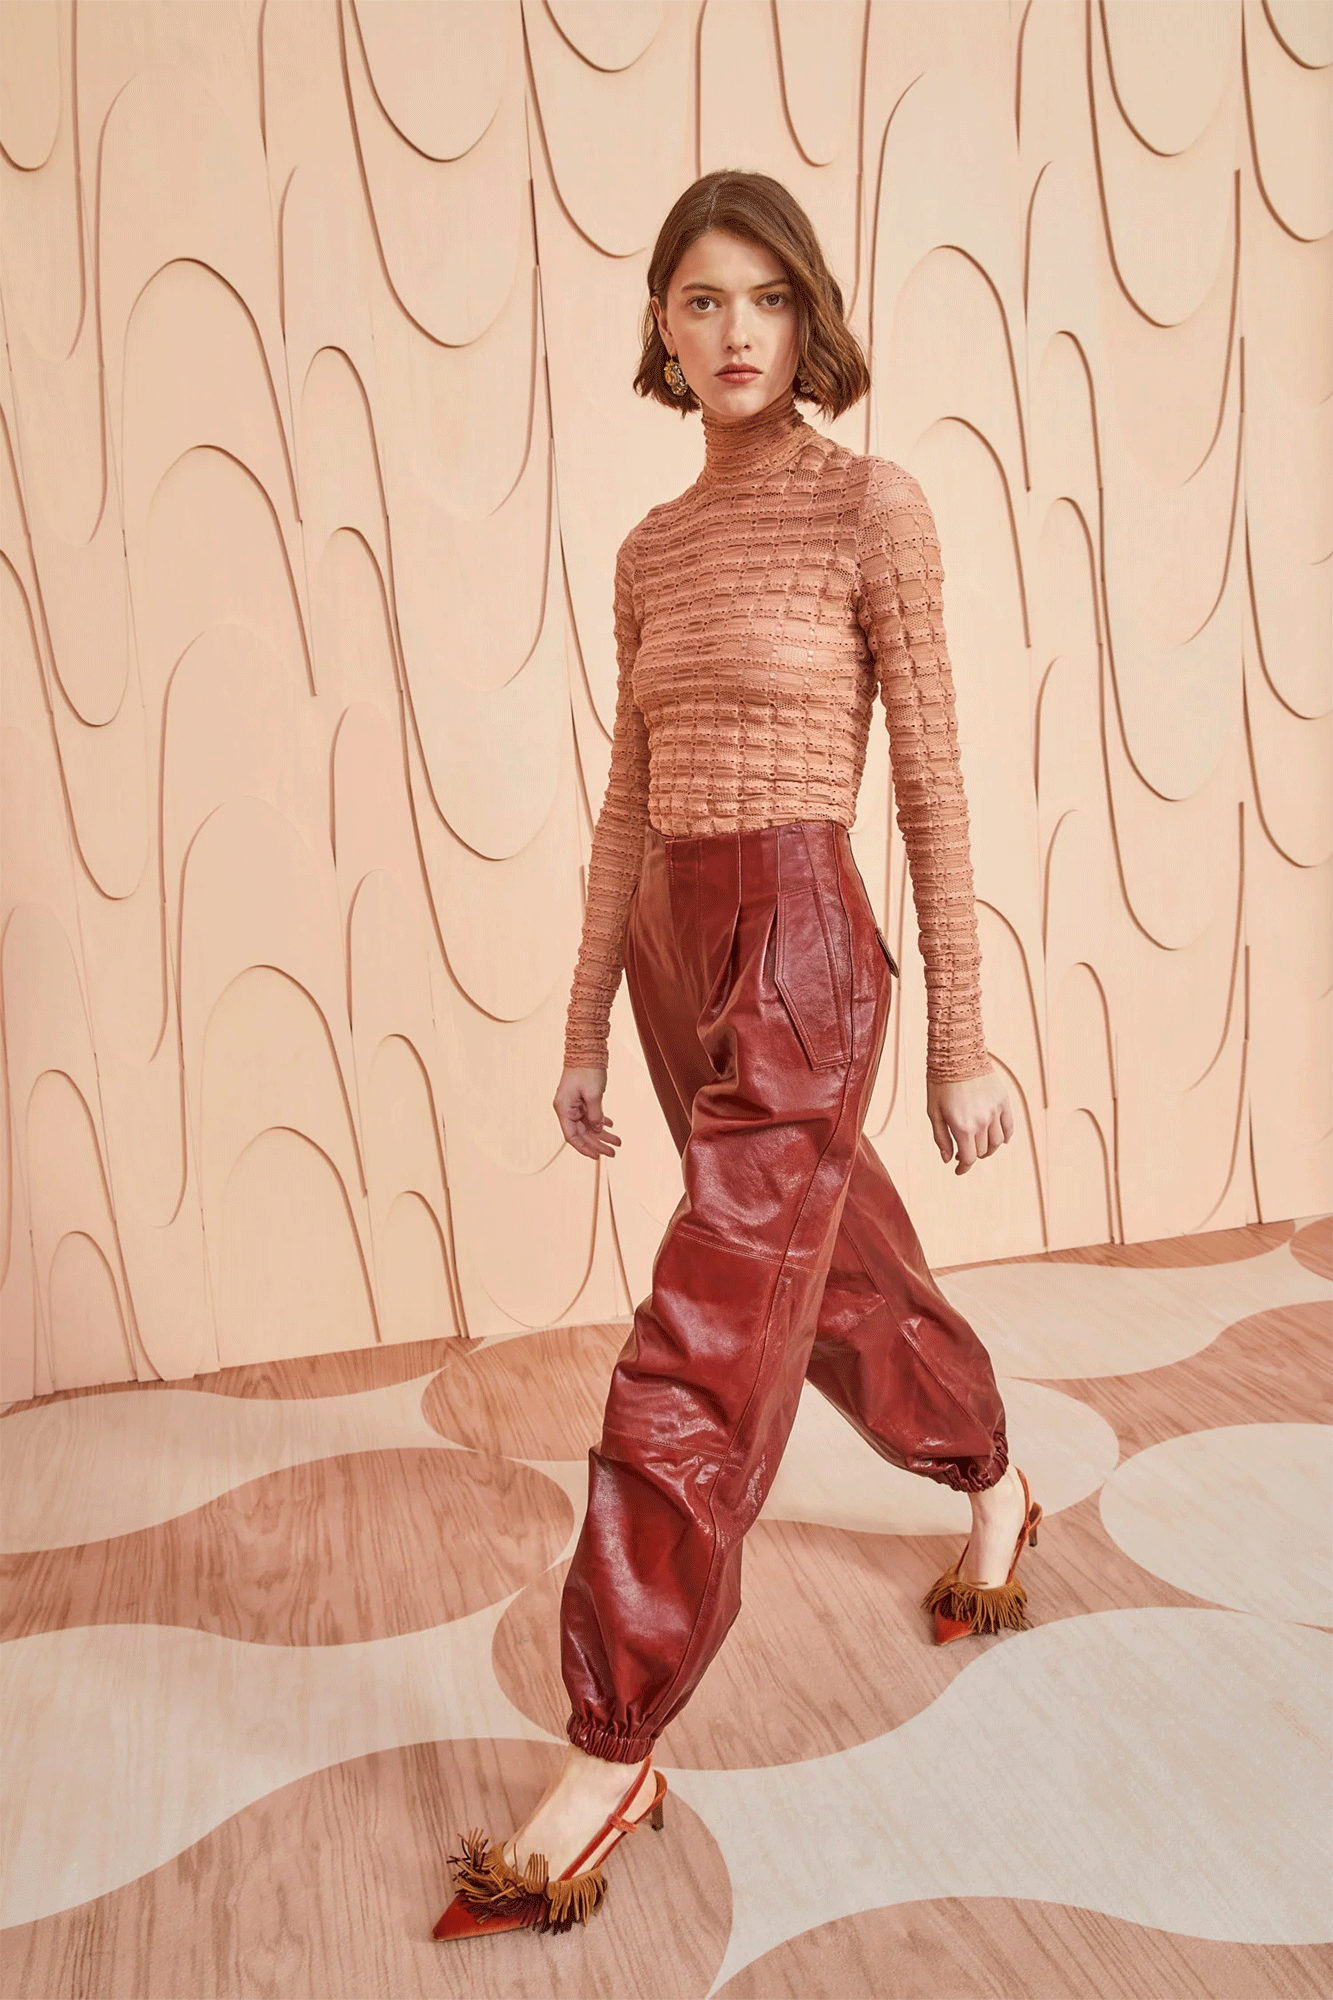 Crafted from luxurious waxed mahogany leather, the Cyrus Pant from Ulla Johnson is designed for lasting quality. Enjoy the soft supple texture and subtle crackled finish, along with convenient side-seam pockets and elastic cuffs. A bandless waistband tailored for a sleeker fit completes the look.